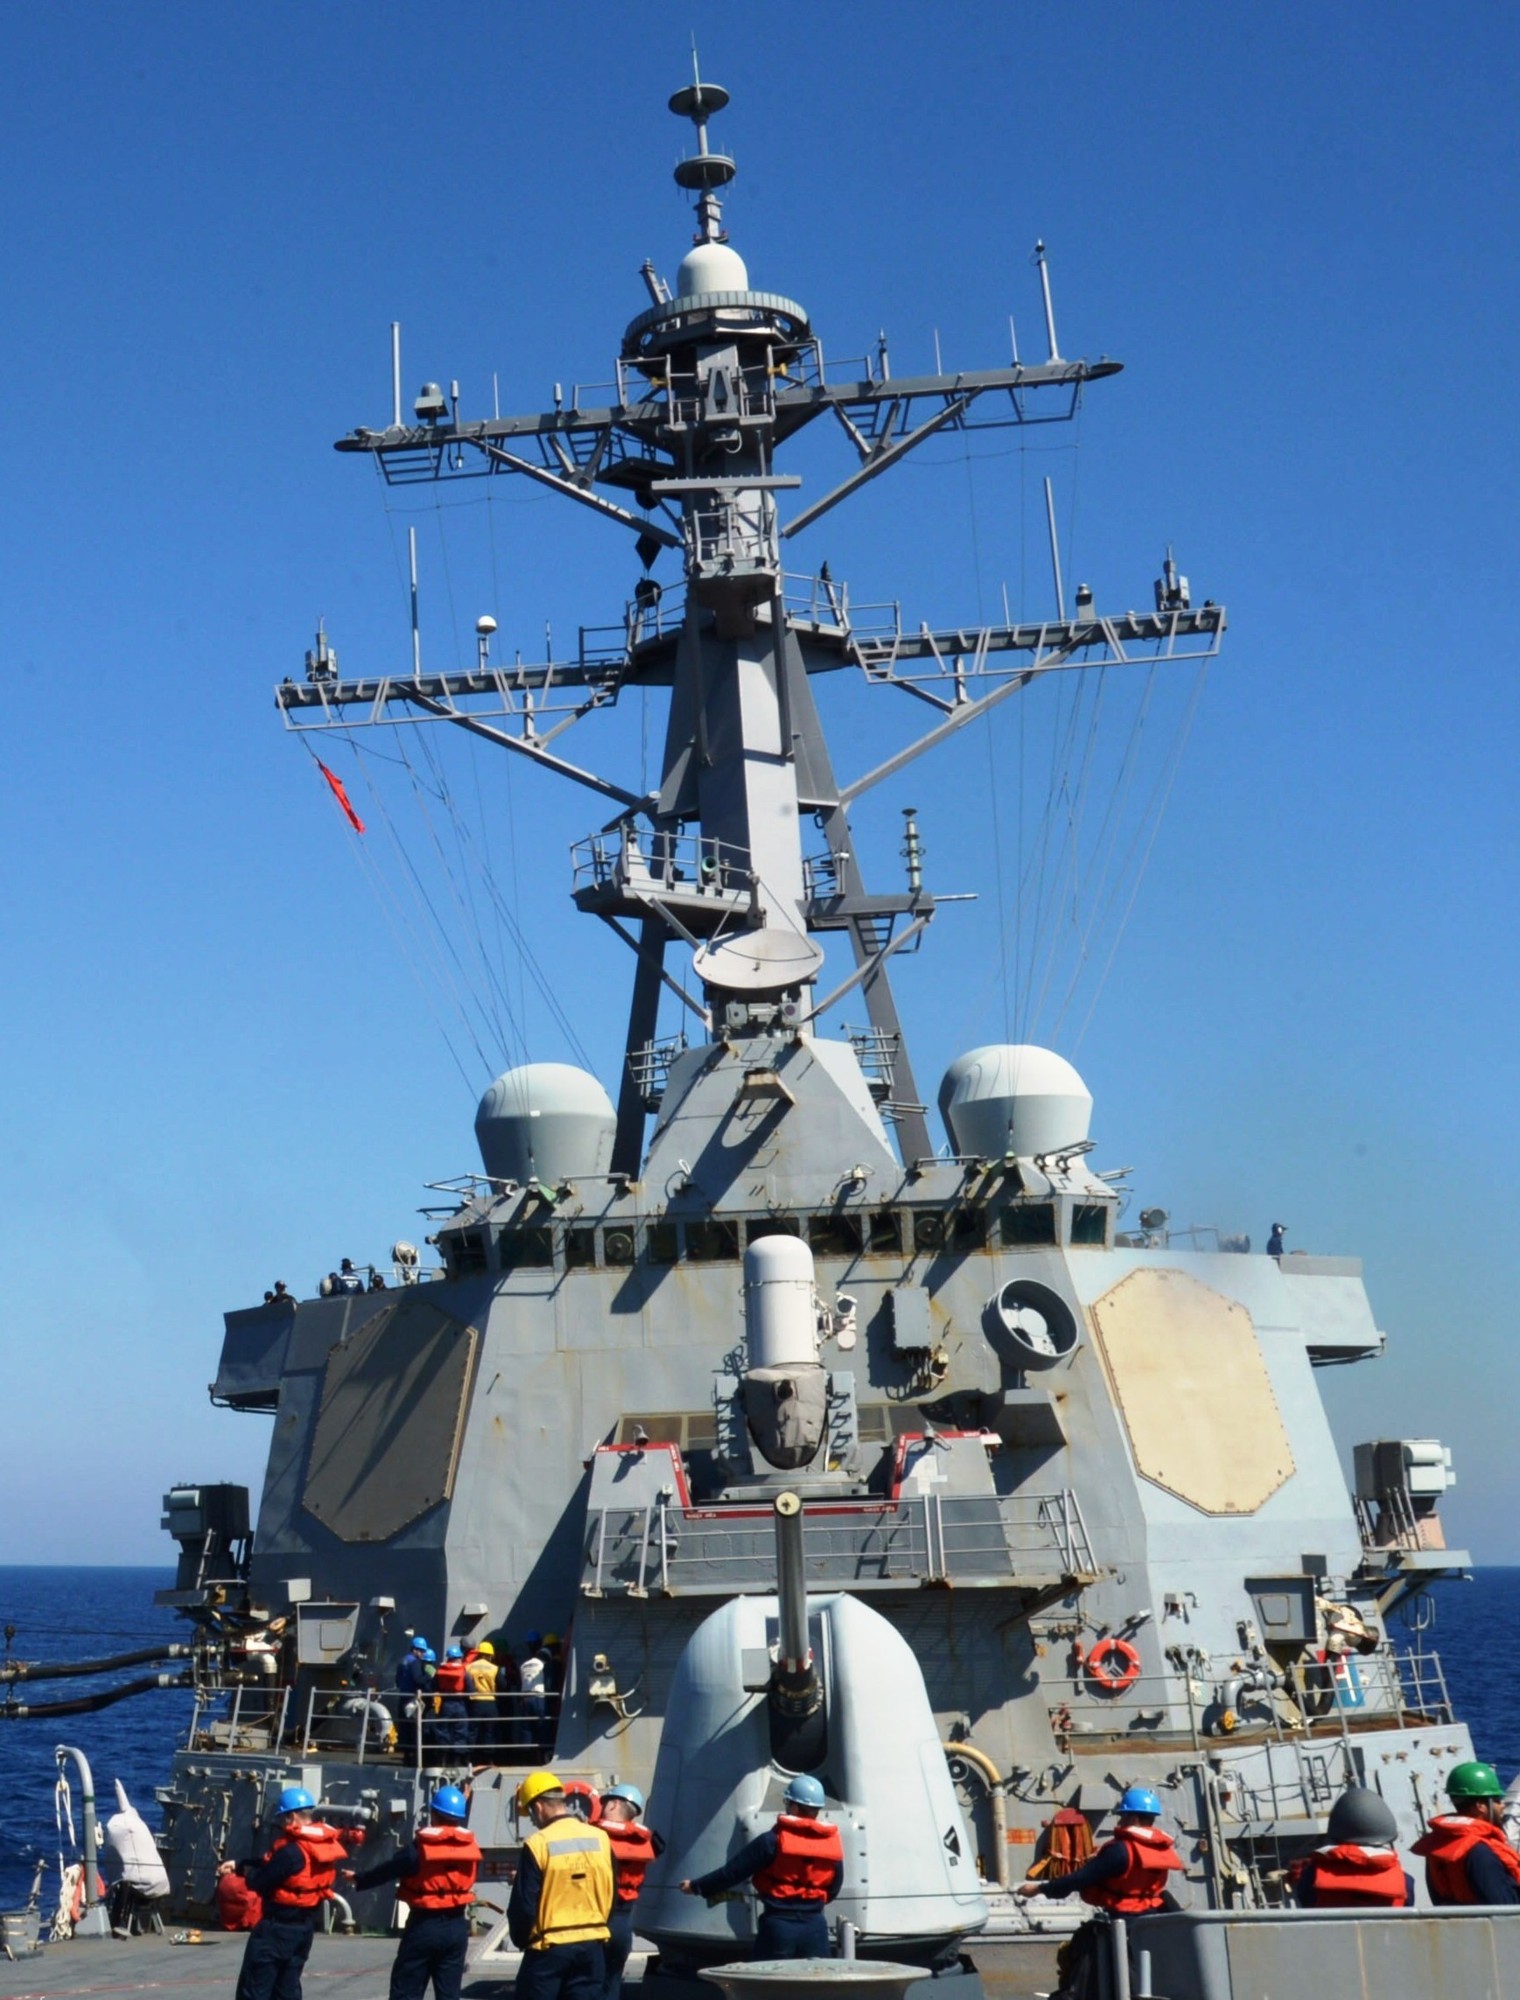 ddg-61 uss ramage guided missile destroyer arleigh burke class aegis us navy 81